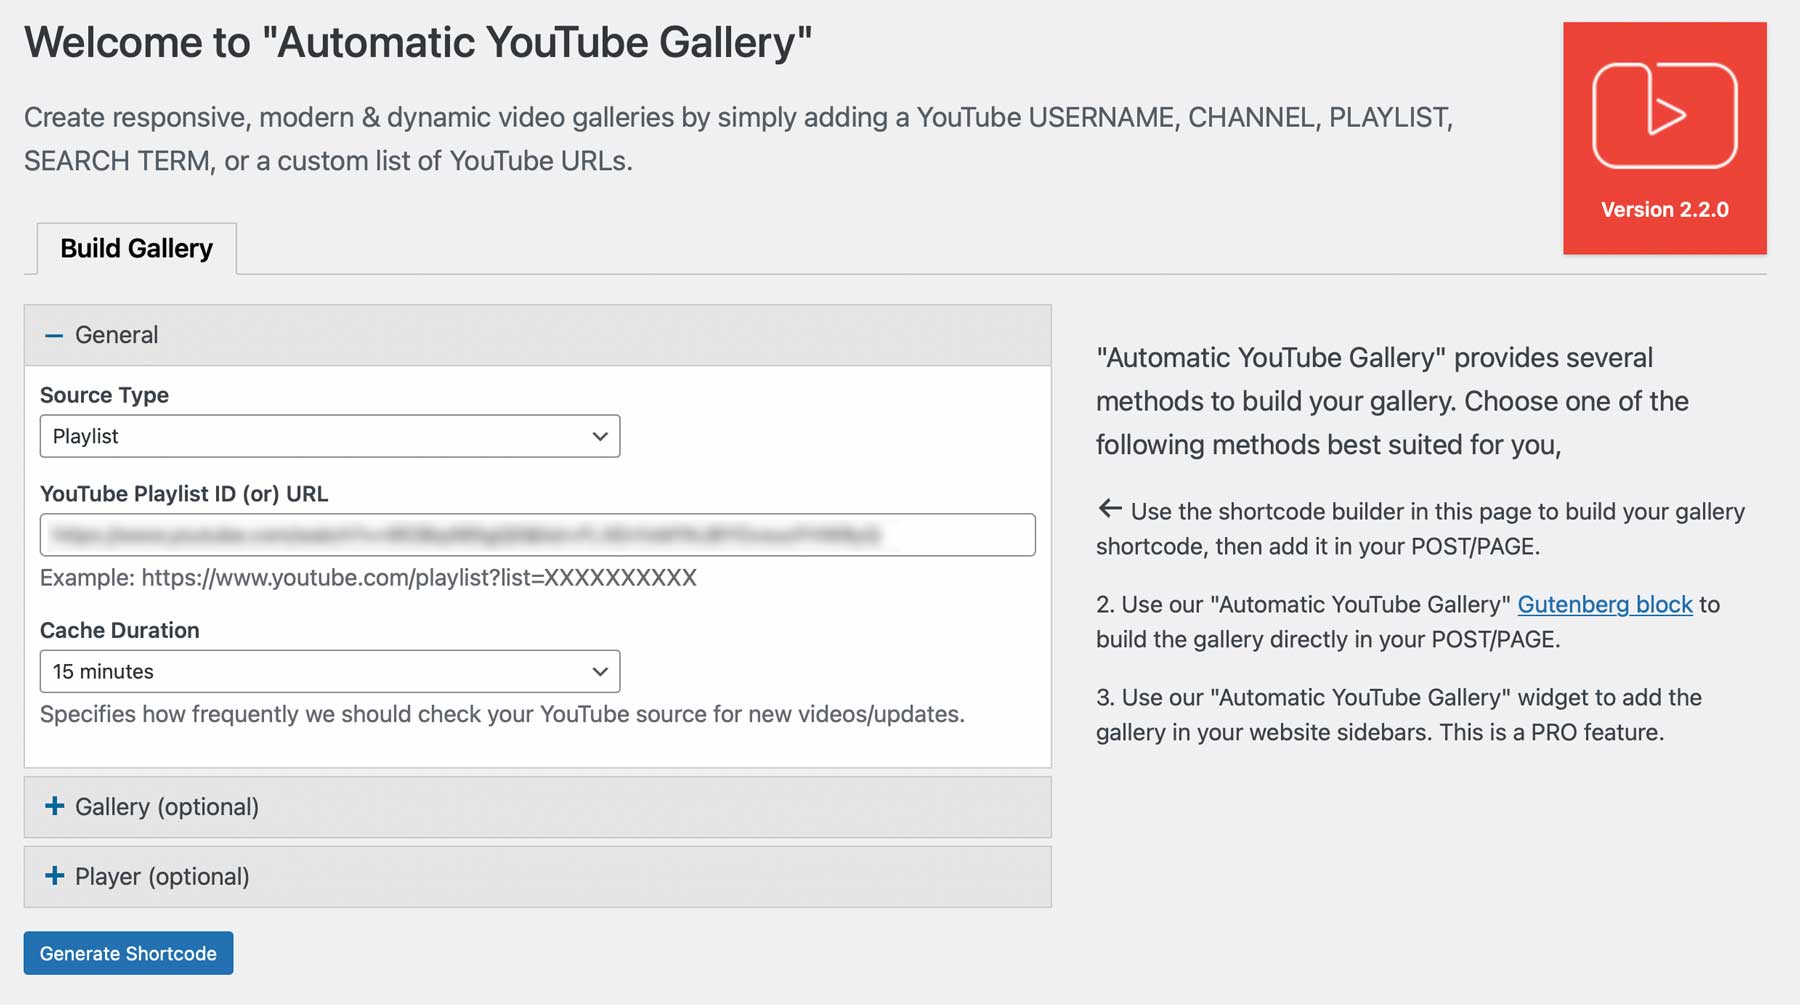 Automatic YouTube Gallery settings